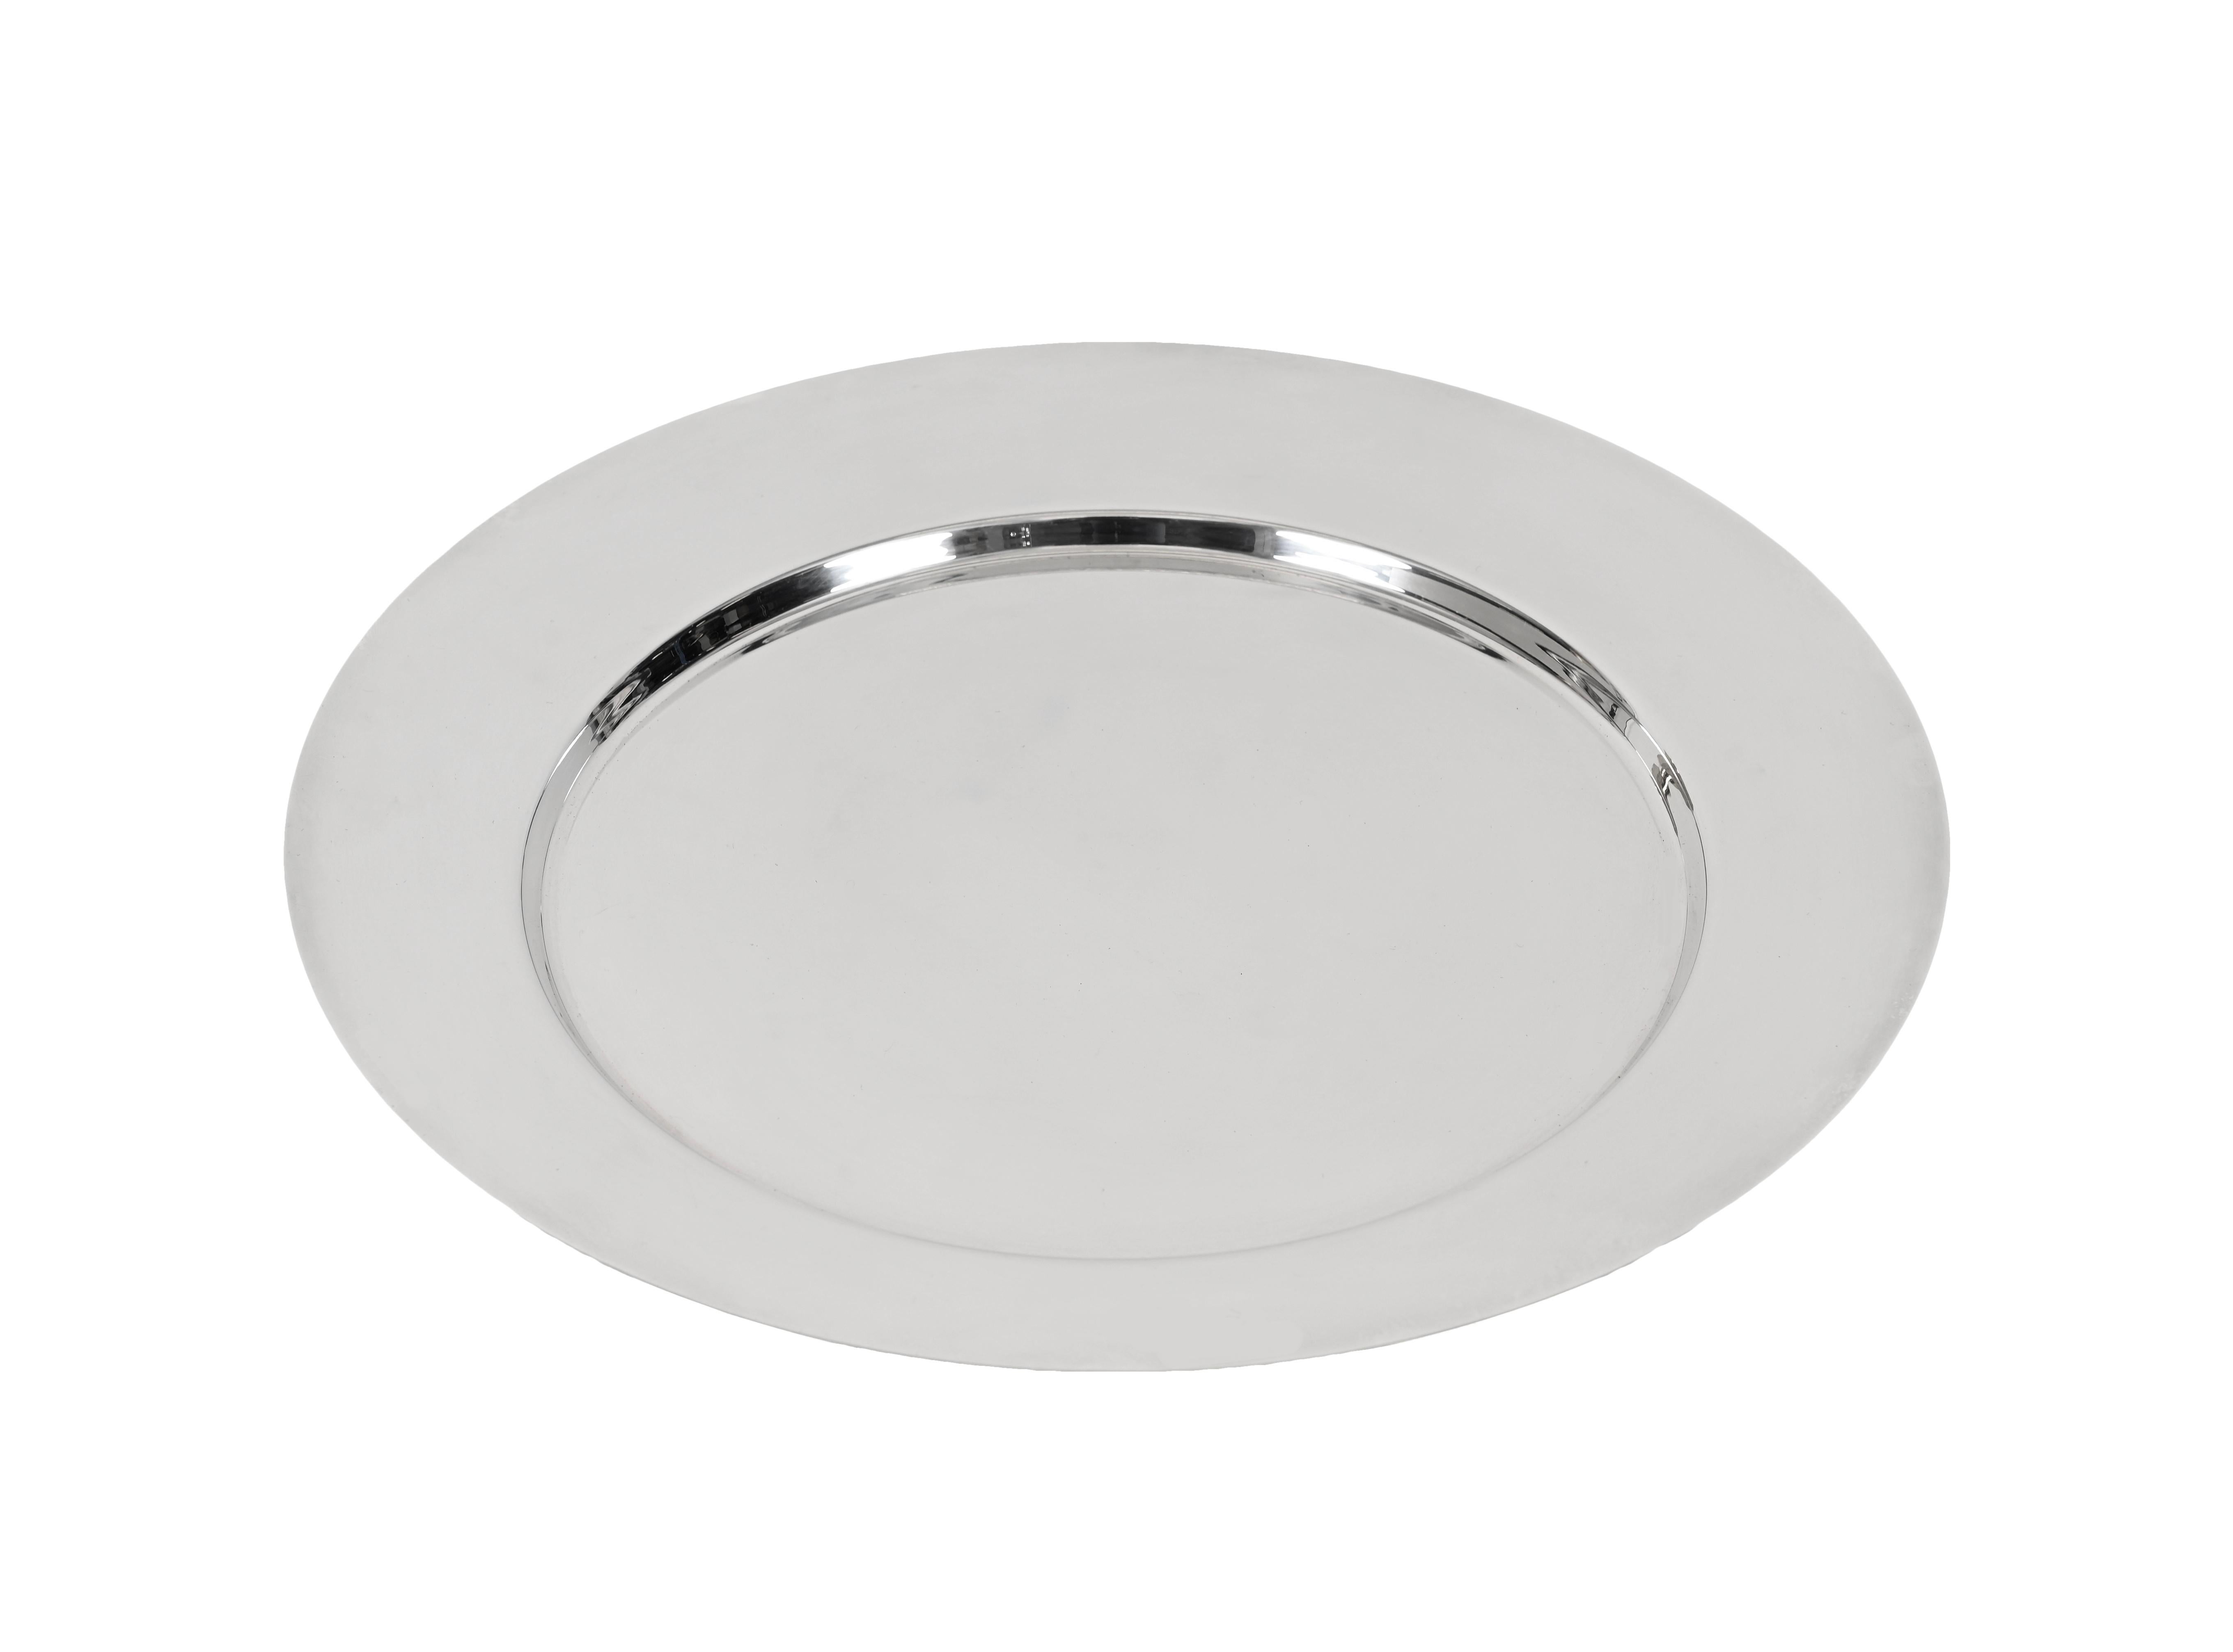 Gio Ponti for Cleto Munari Modernist Silver Plated Serving Plate Italy, 1980s For Sale 6